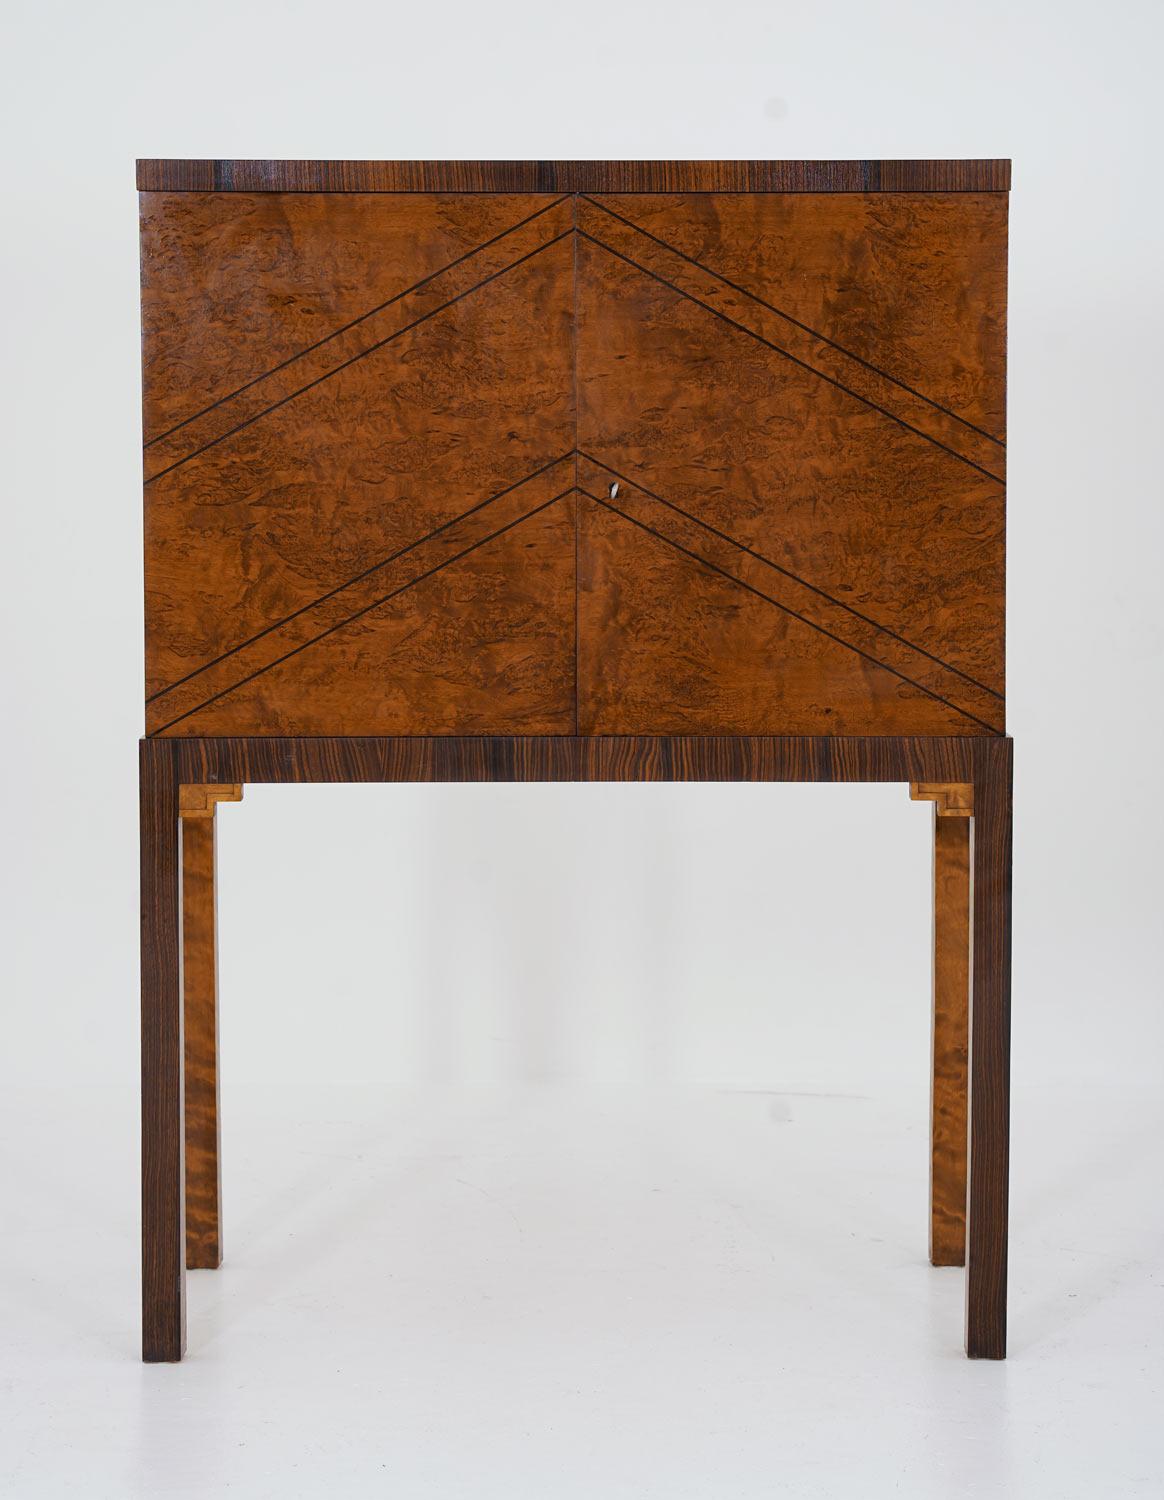 Stunning cabinet manufactured in Sweden, 1930s.
This cabinet is a great example of the golden age of Swedish furniture, showing superb quality in every detail. The front and sides are covered with elm-root veneer, with details in zebra wood. The